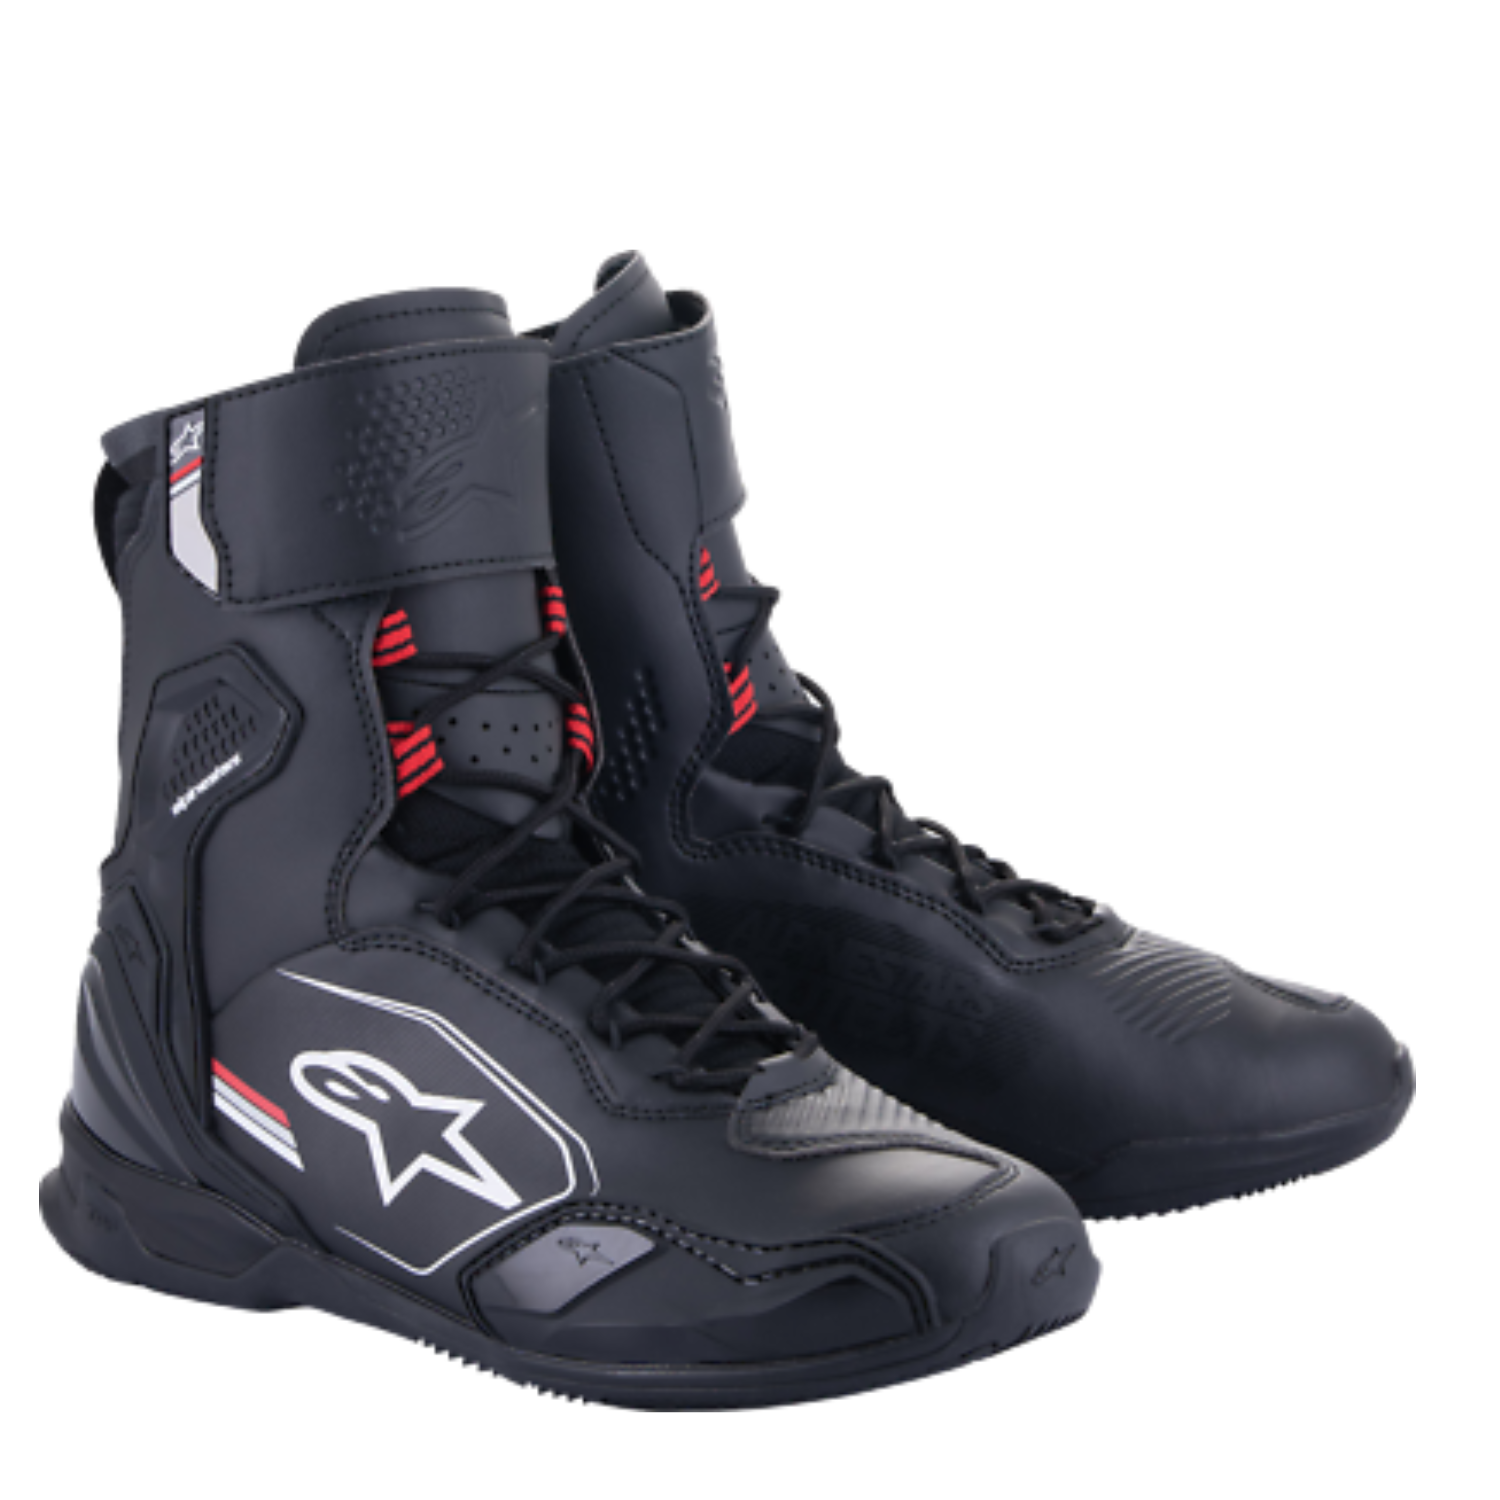 Image of Alpinestars Superfaster Shoes Black Gray Bright Red Size US 7 EN